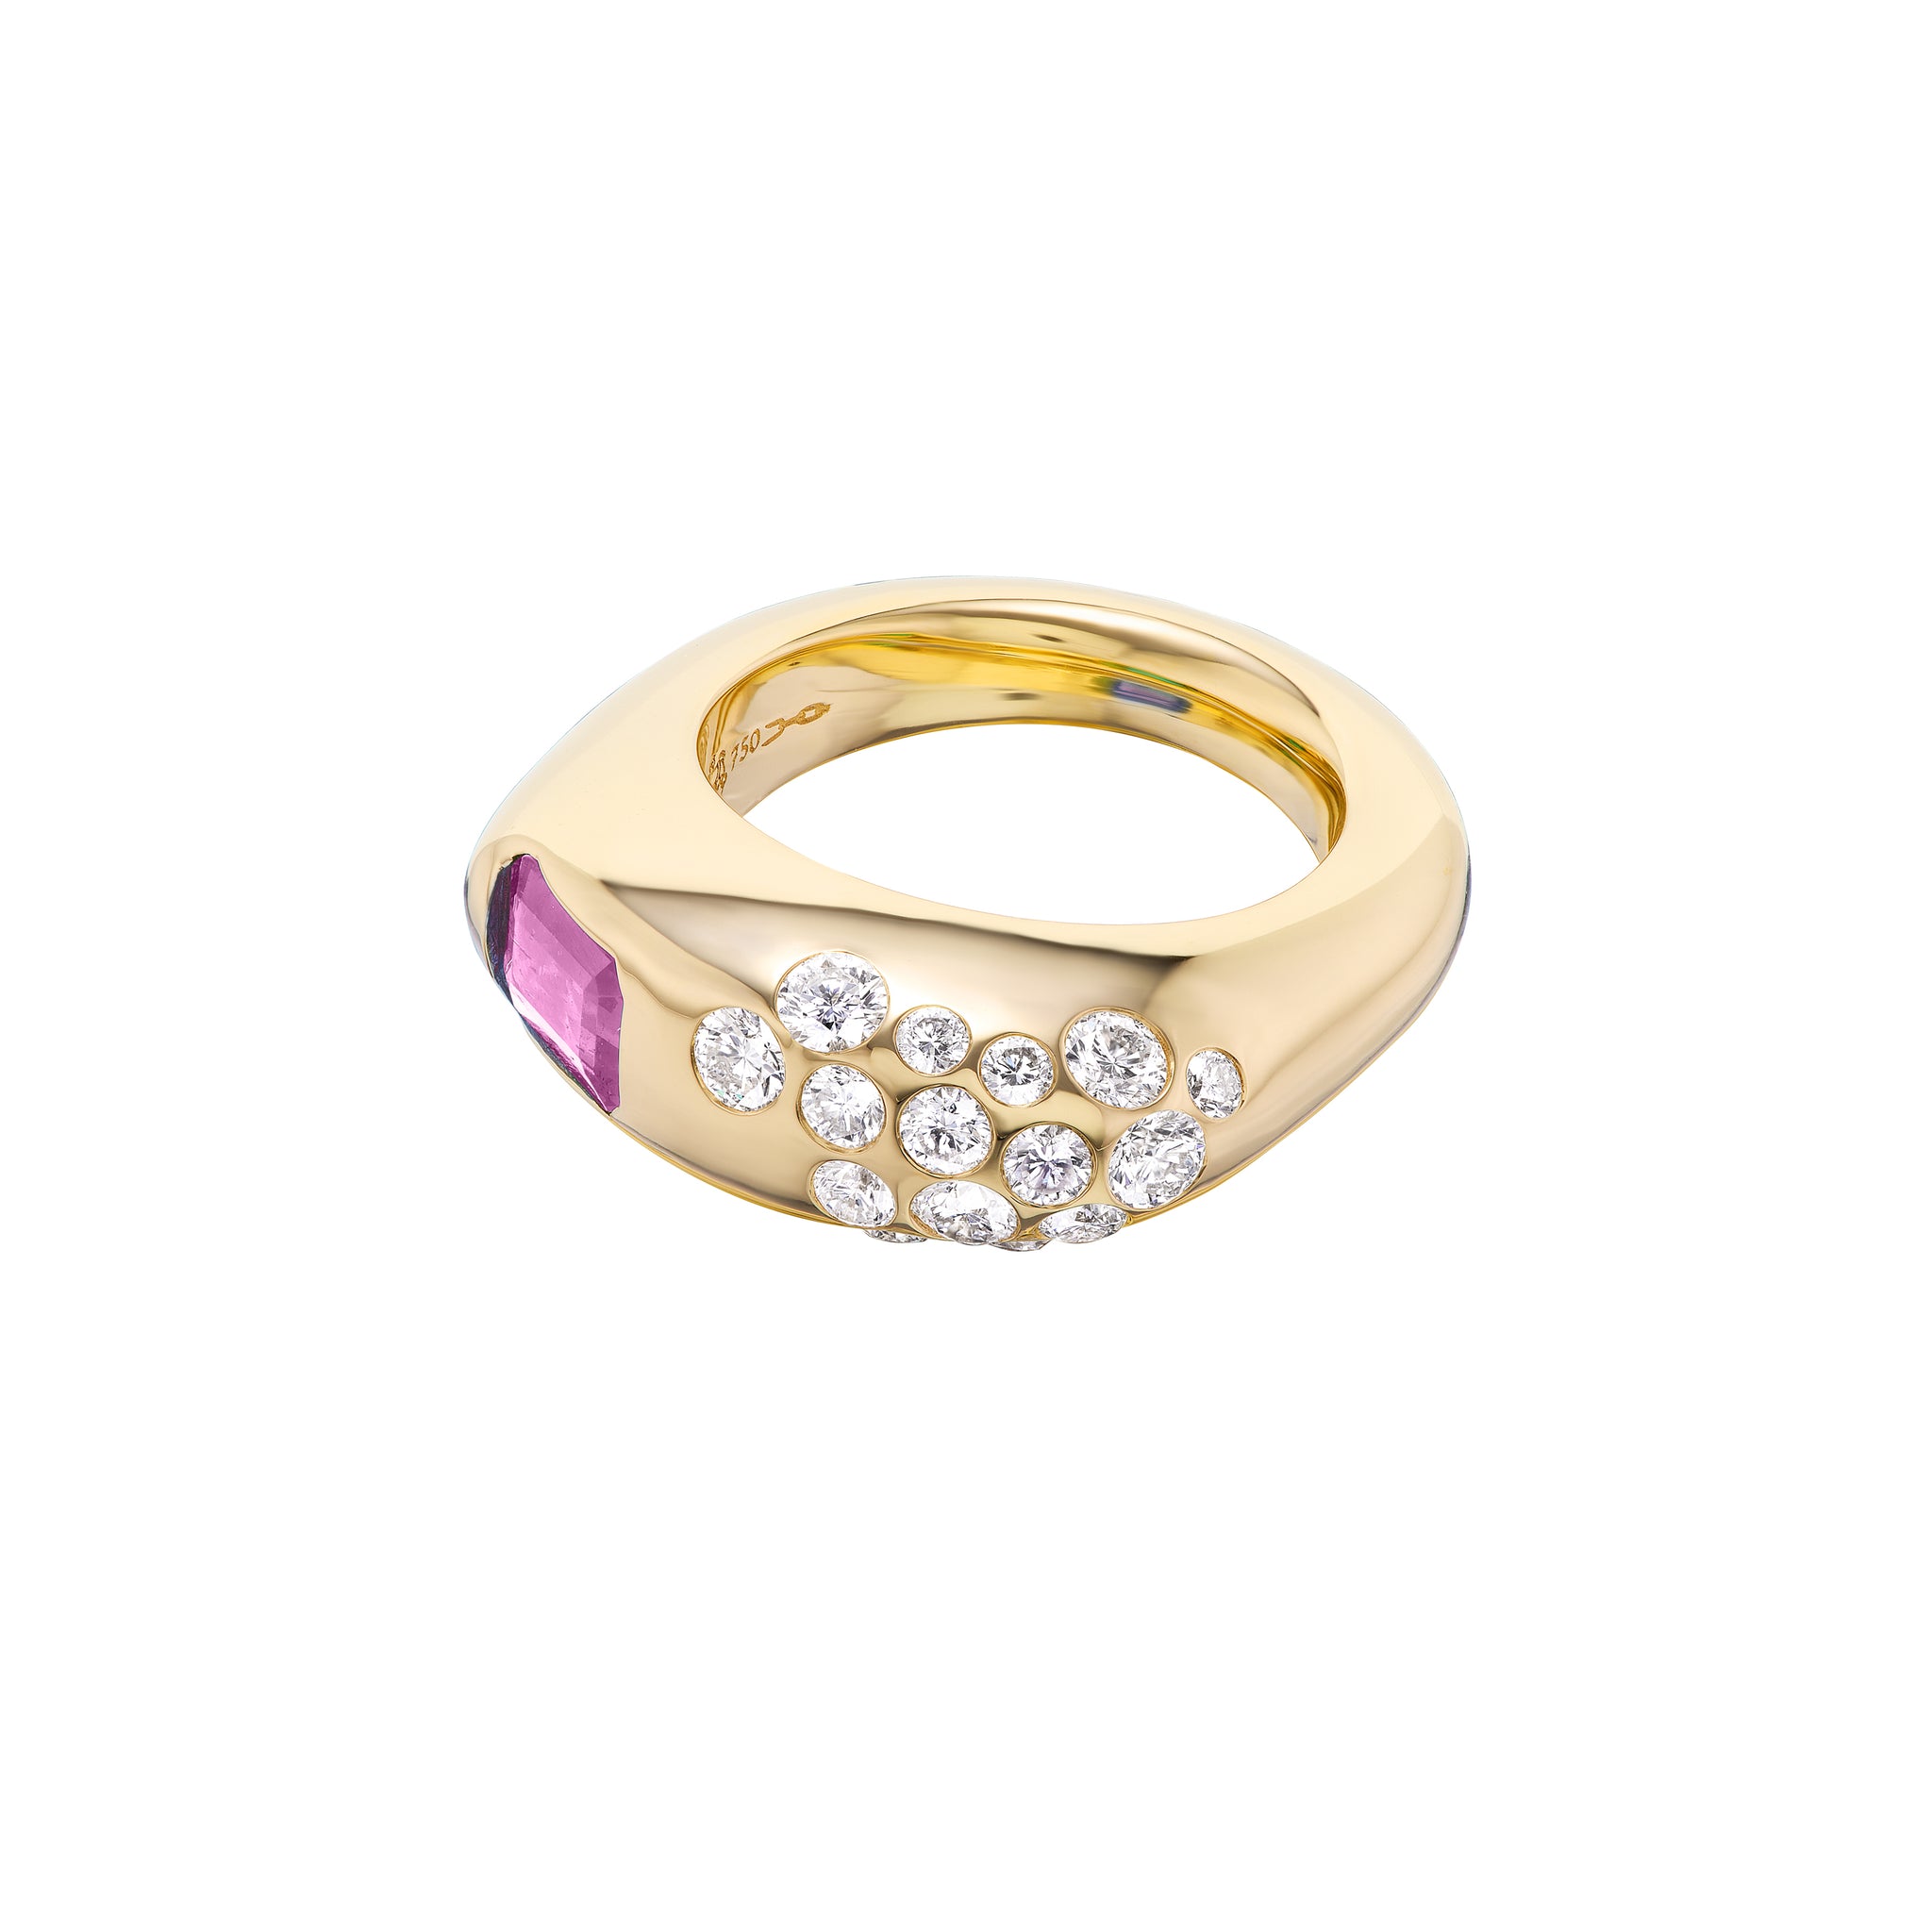 DOWRY RING